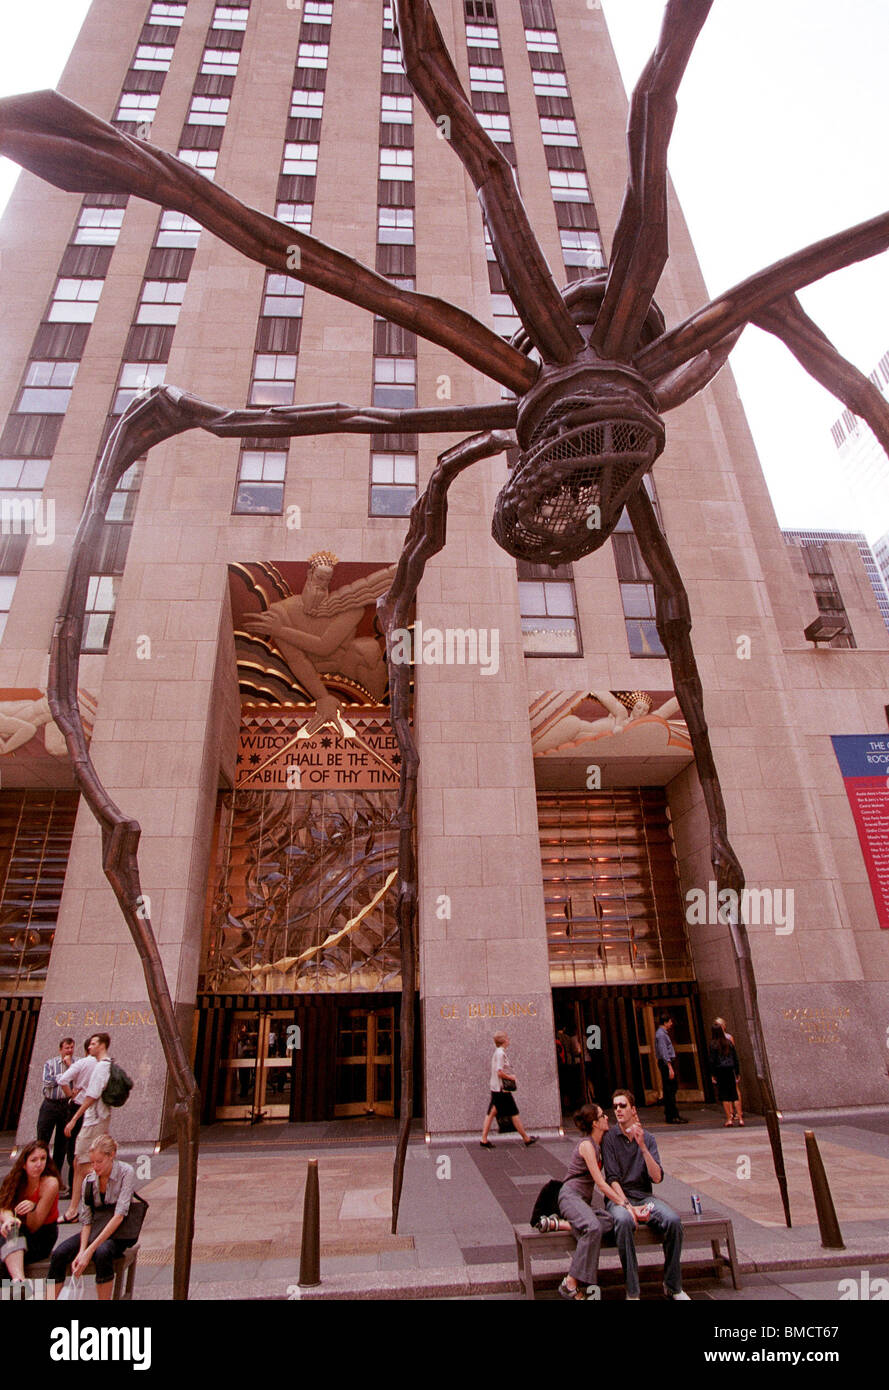 Louise Bourgeois' "Maman" 1999 on display at Rockefeller Center on August 16, 2001. Stock Photo